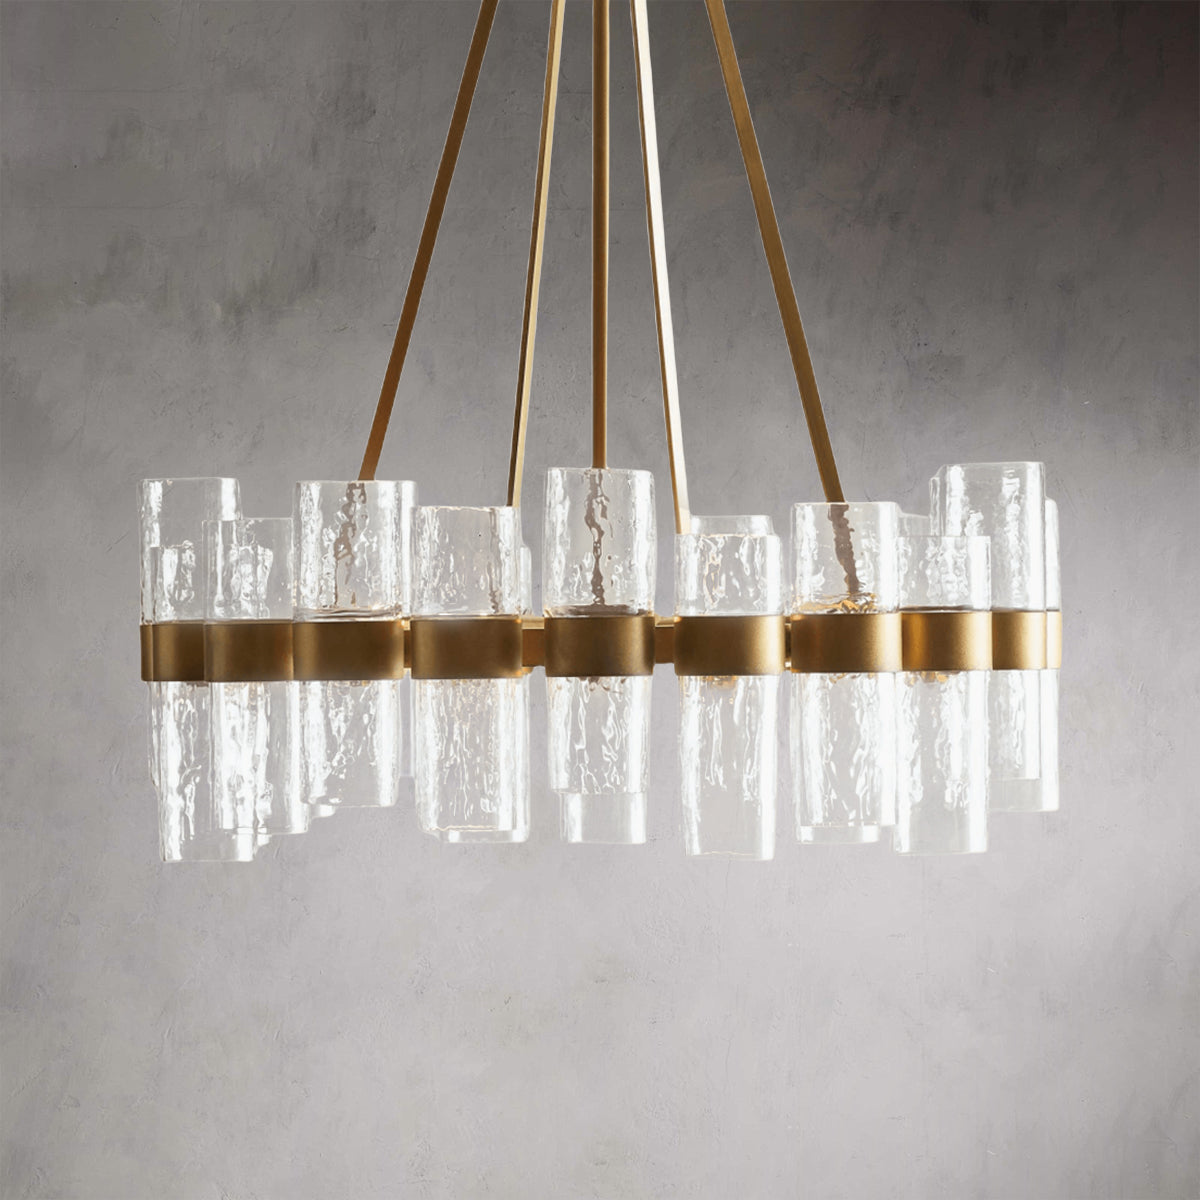 Artisan Glow Recycled Glass Chandelier - Industrial Style with Handcrafted Recycled Glass and Dimmable Features, Perfect for Living Room